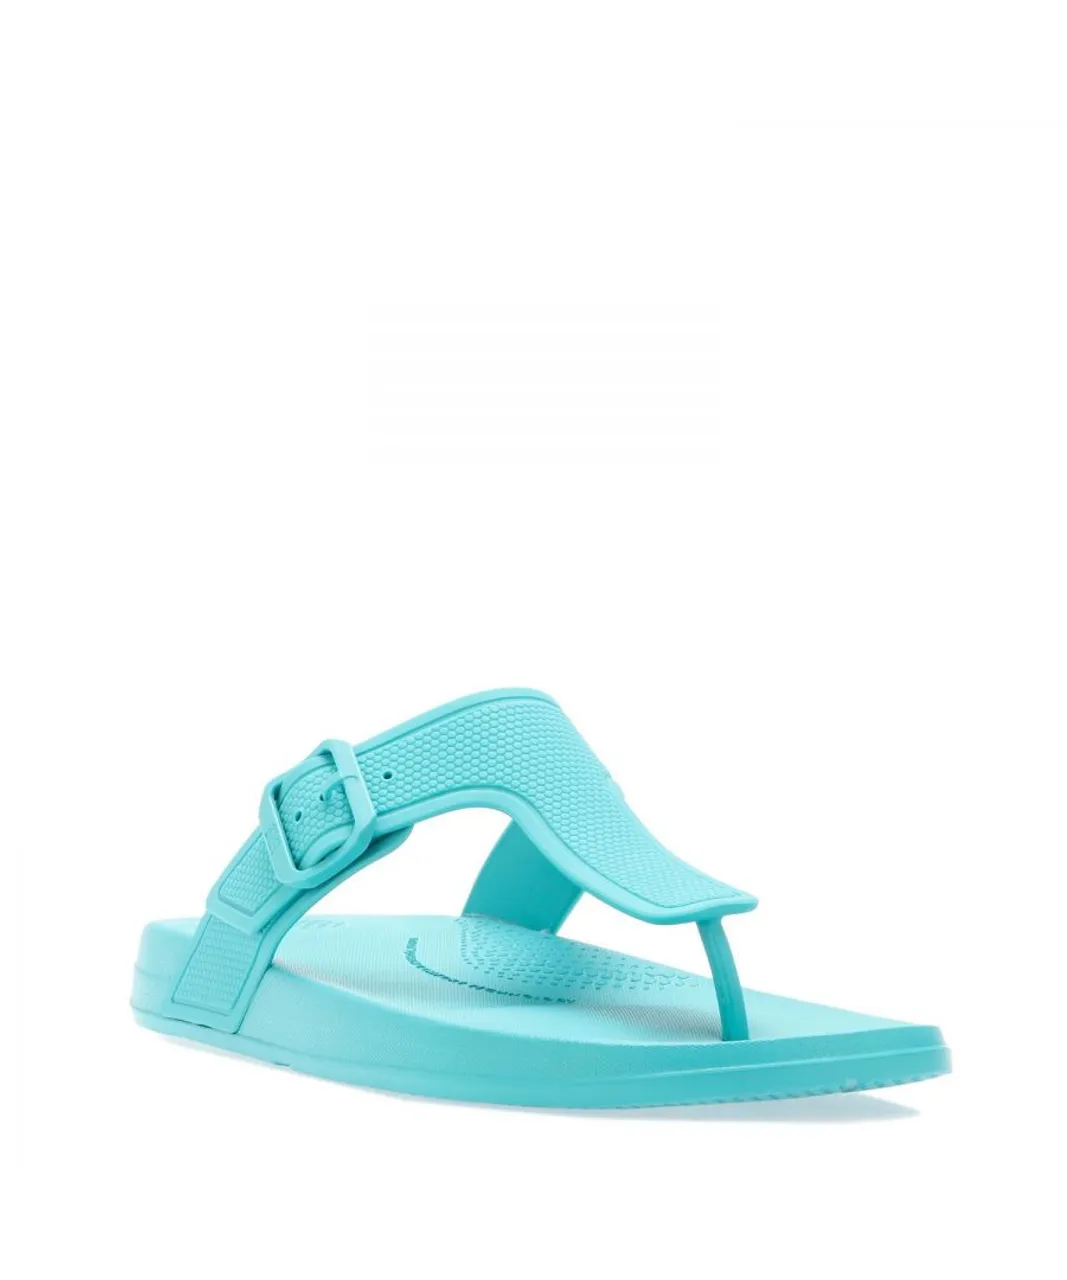 Fitflop Womenss Fit Flop iQushion Adjustable Buckle Flip-Flops in Blue Rubber